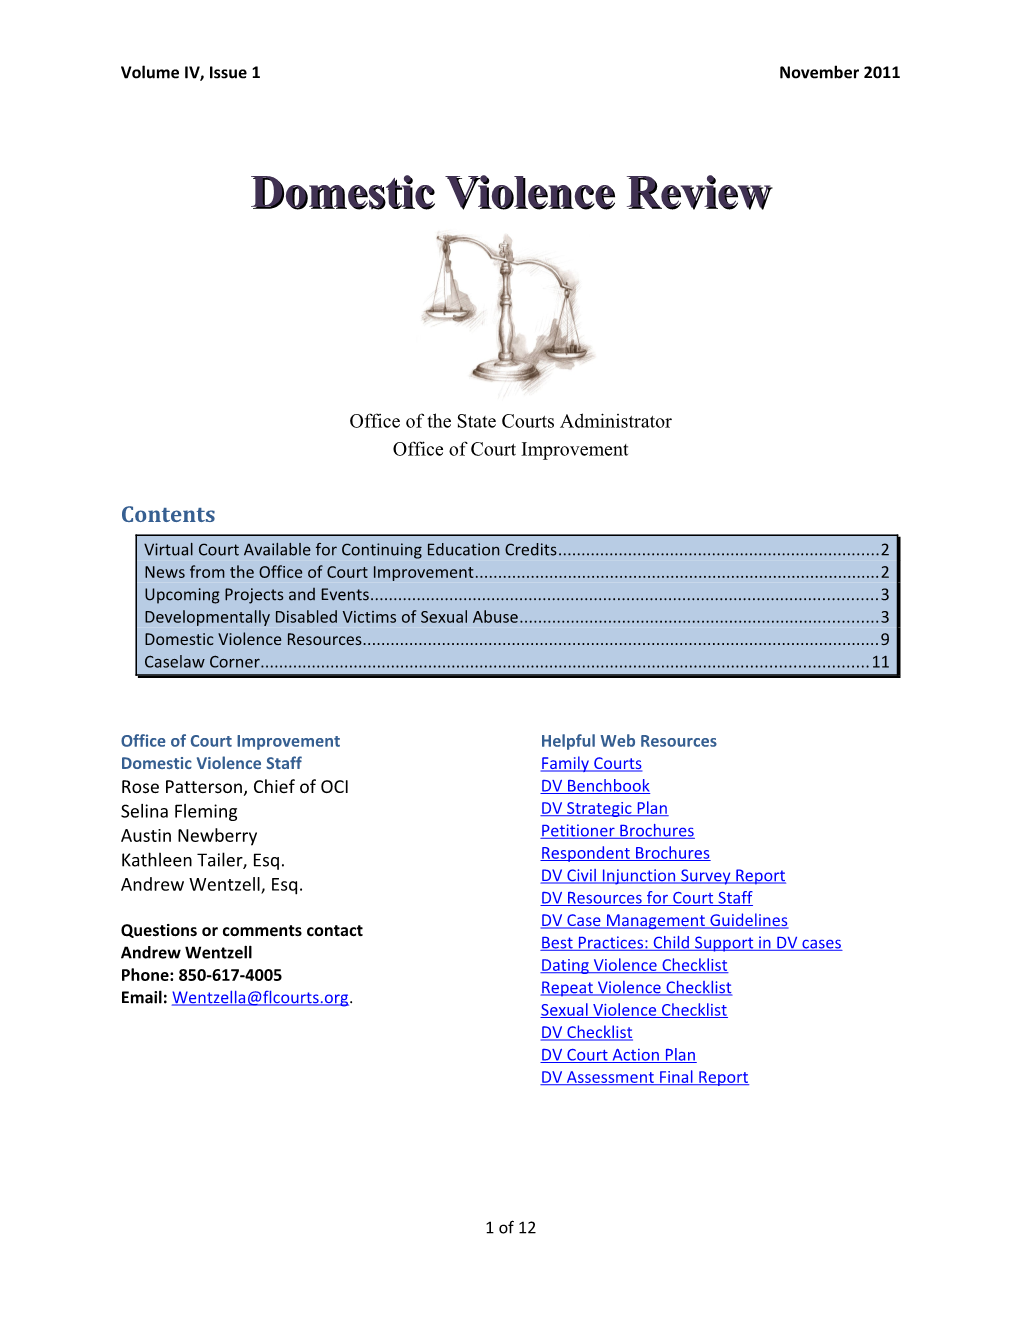 Domestic Violence Review s1